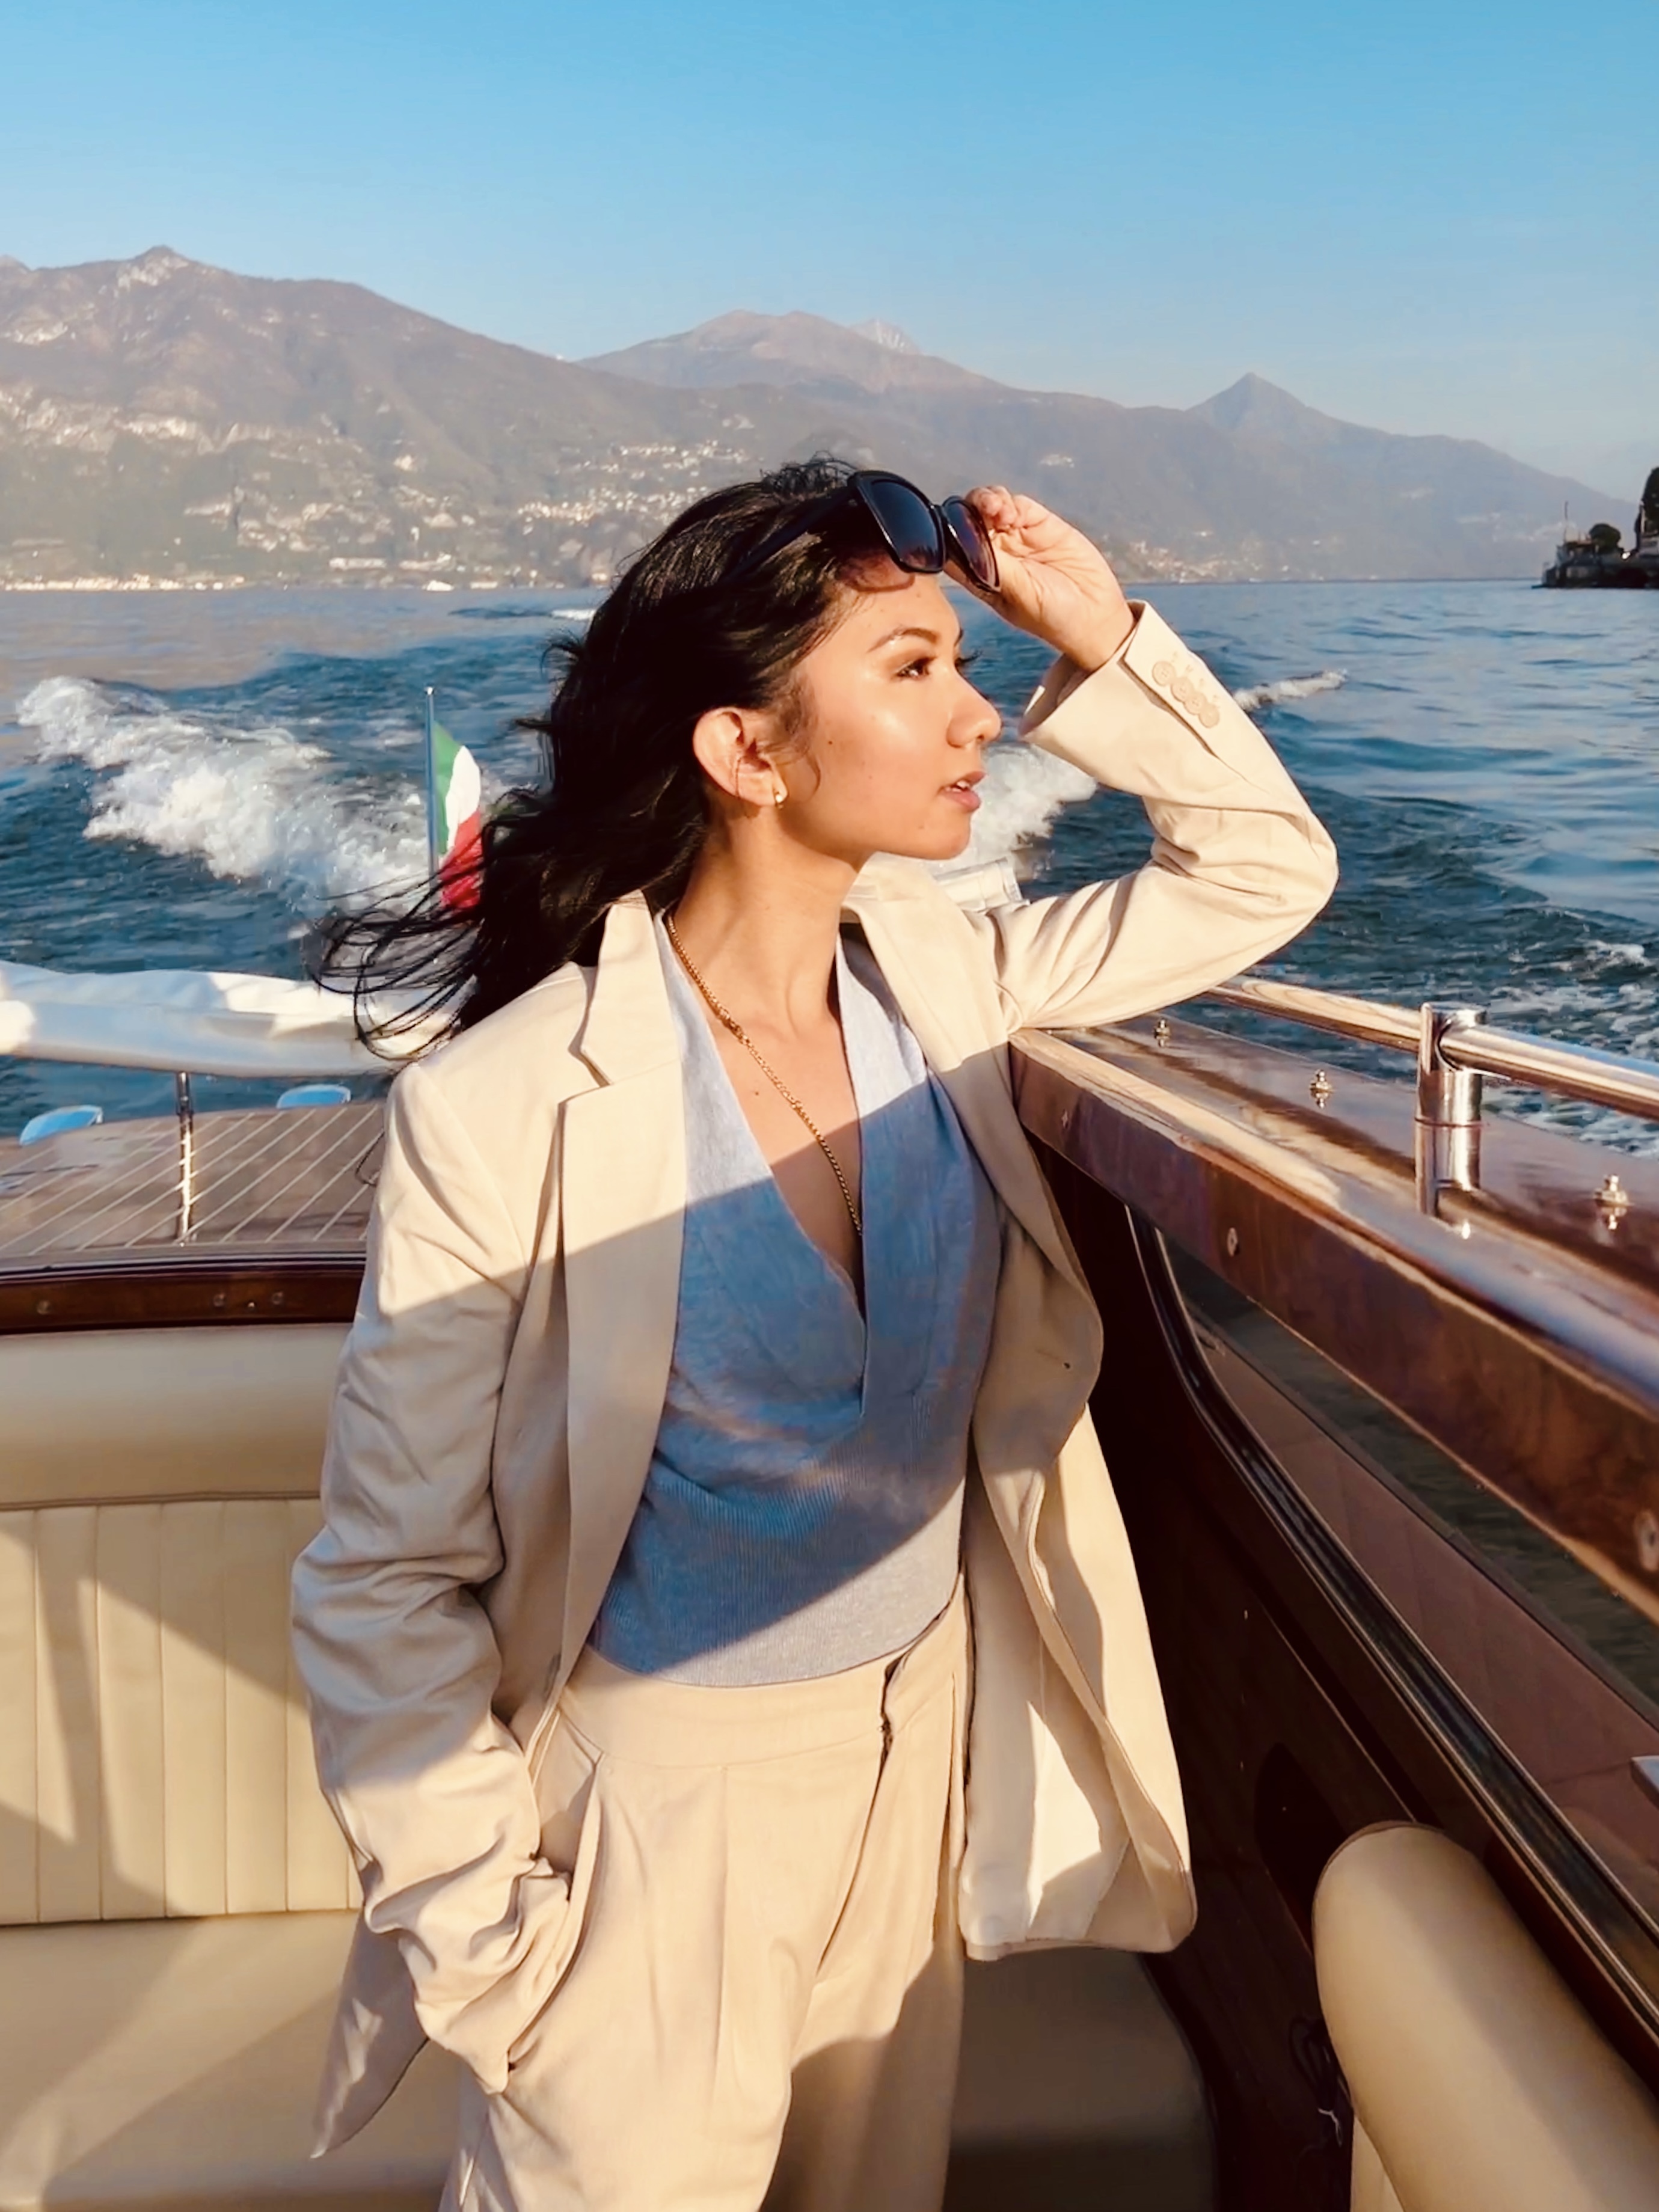 Woman in blue shirt, white blazer, and white pants on a Venetian taxi boat looks out onto the waters of Lake Como